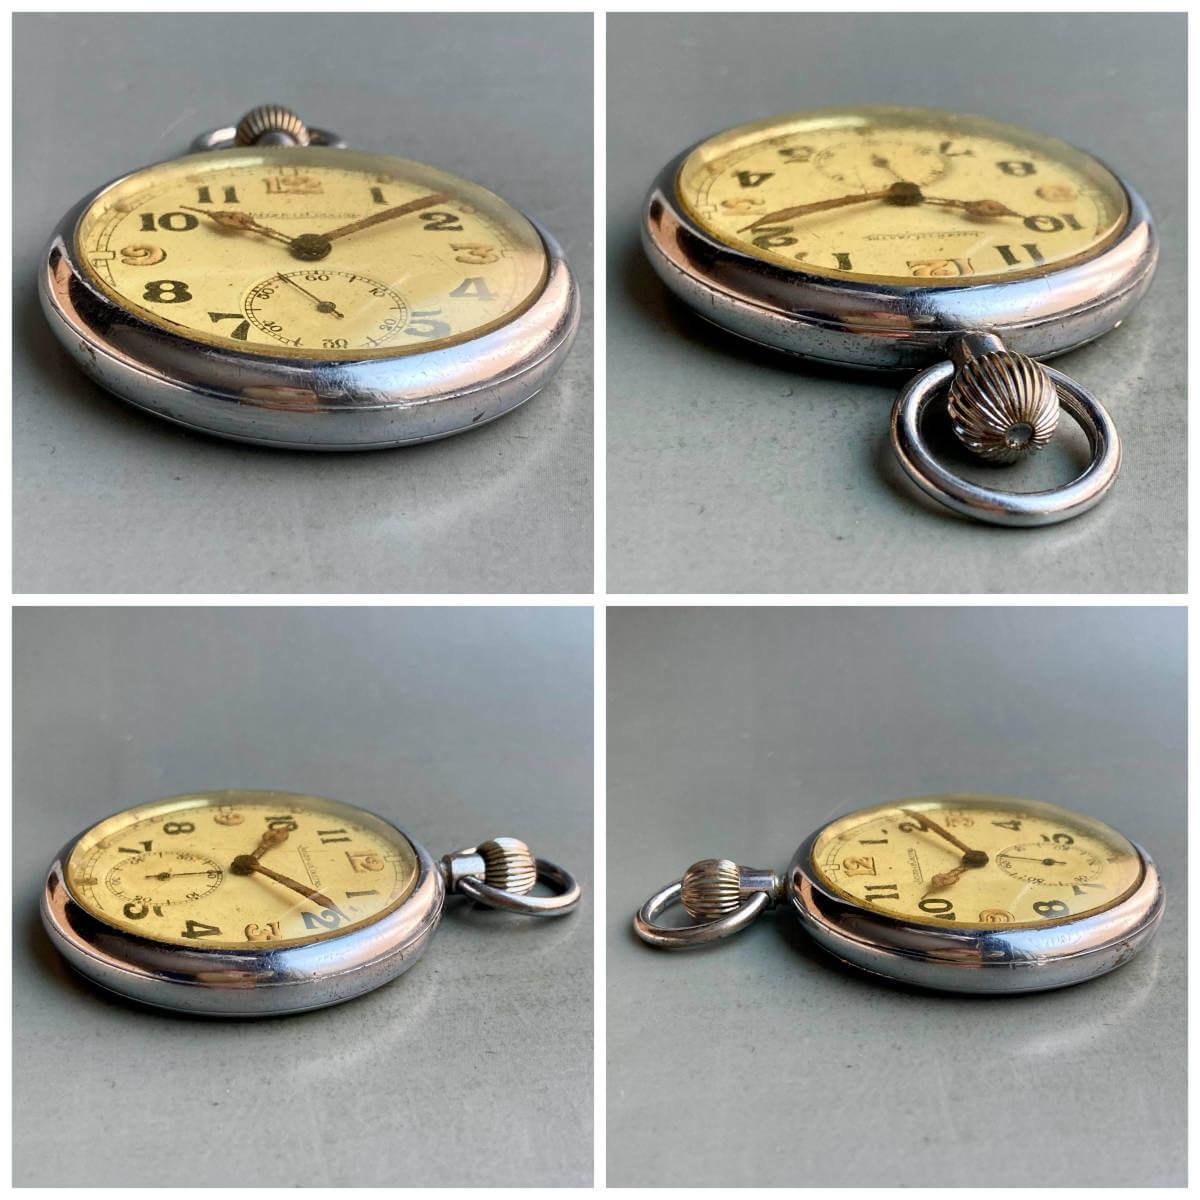 Jaeger-Lecoultre Pocket Watch Military 1943 Manual 51mm Vintage Antique - Murphy Johnson Watches Co.